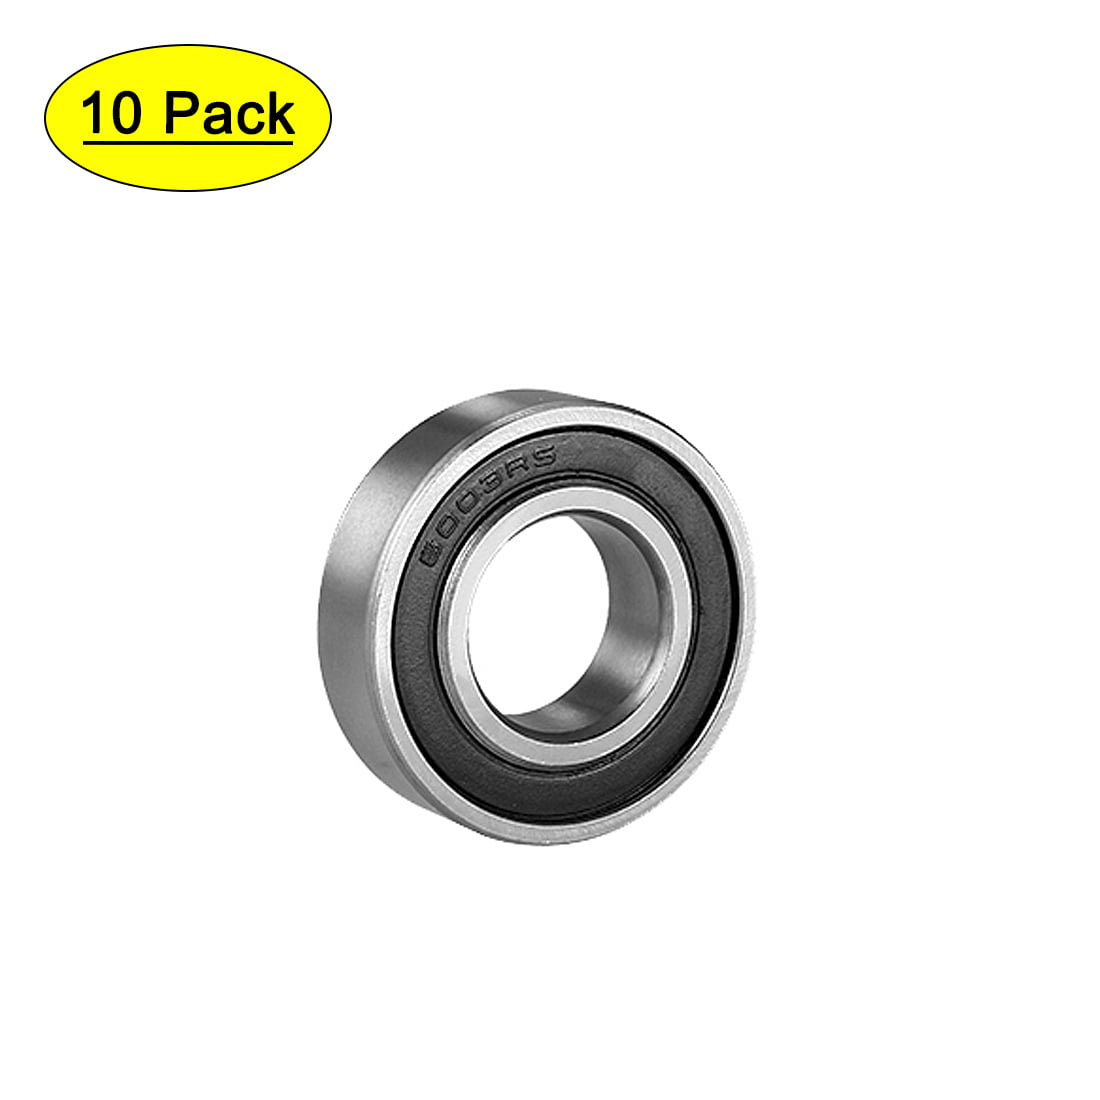 2pcs 6200 2RS Rubber Seal Carbon Steel Ball Bearing Industry Replacement 